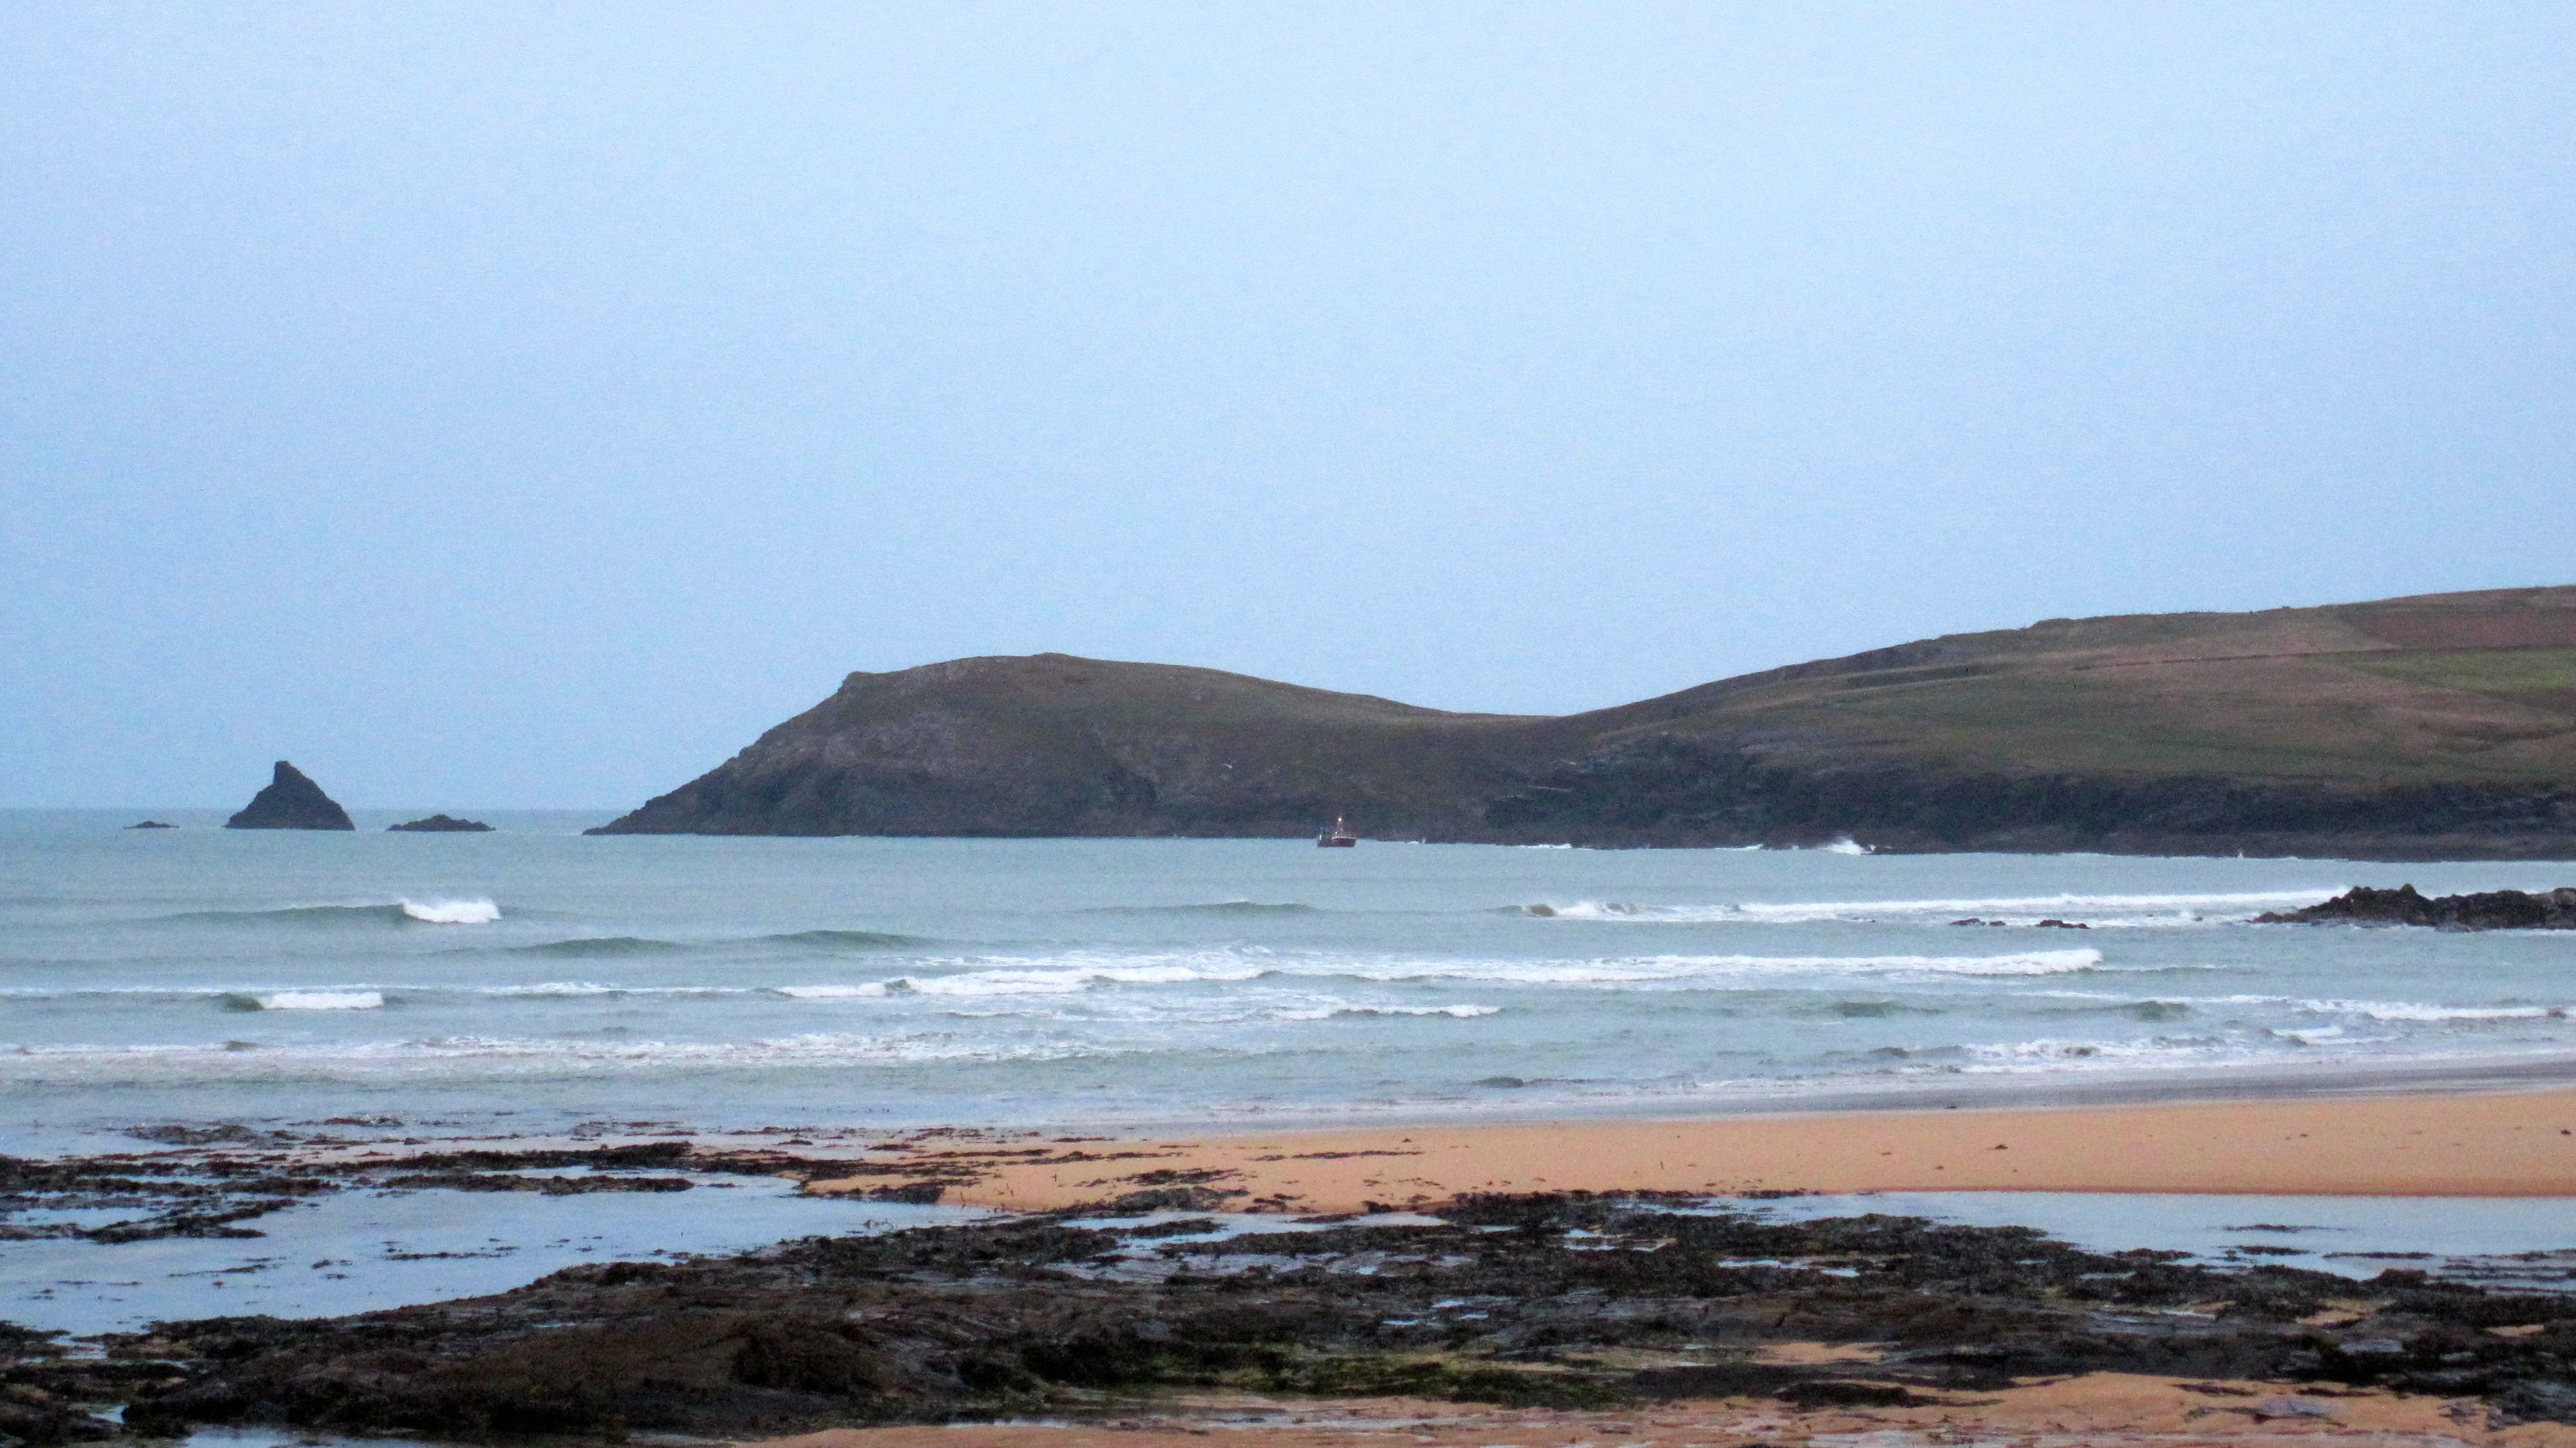 Surf Report for Wednesday 19th November 2014